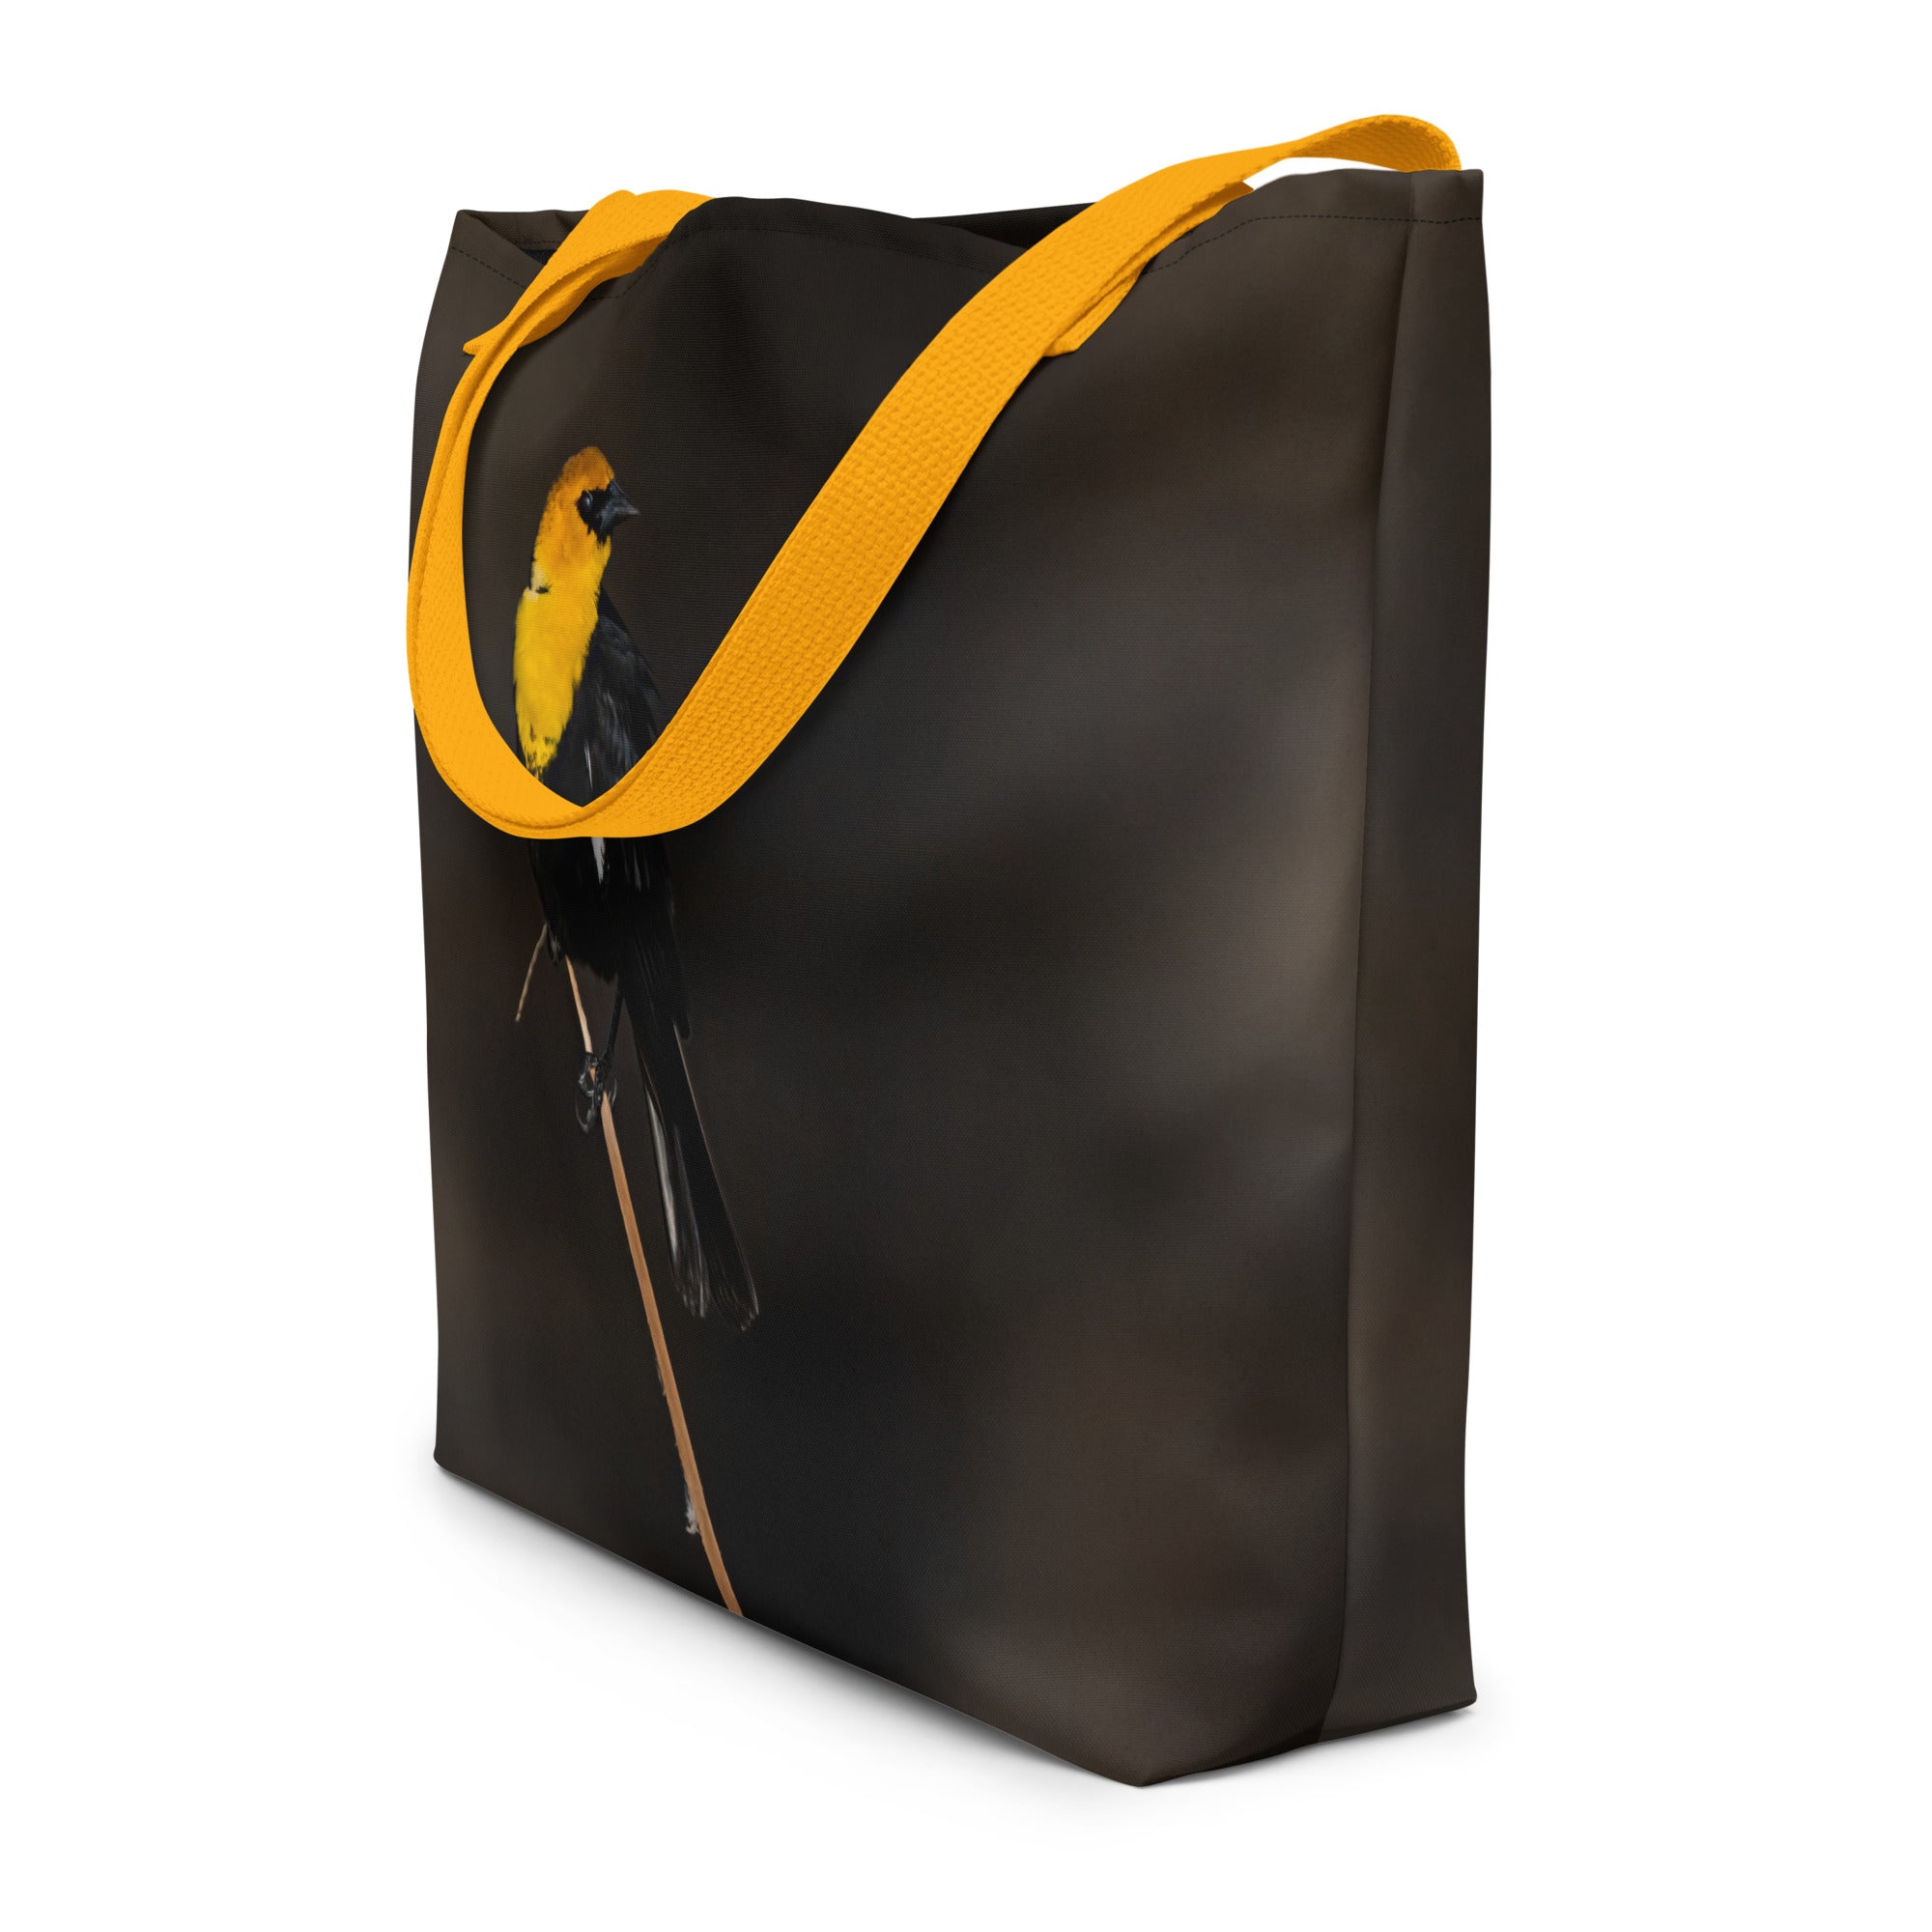 Yellow Headed All-Over Print Large Tote Bag - The Overland Diaries